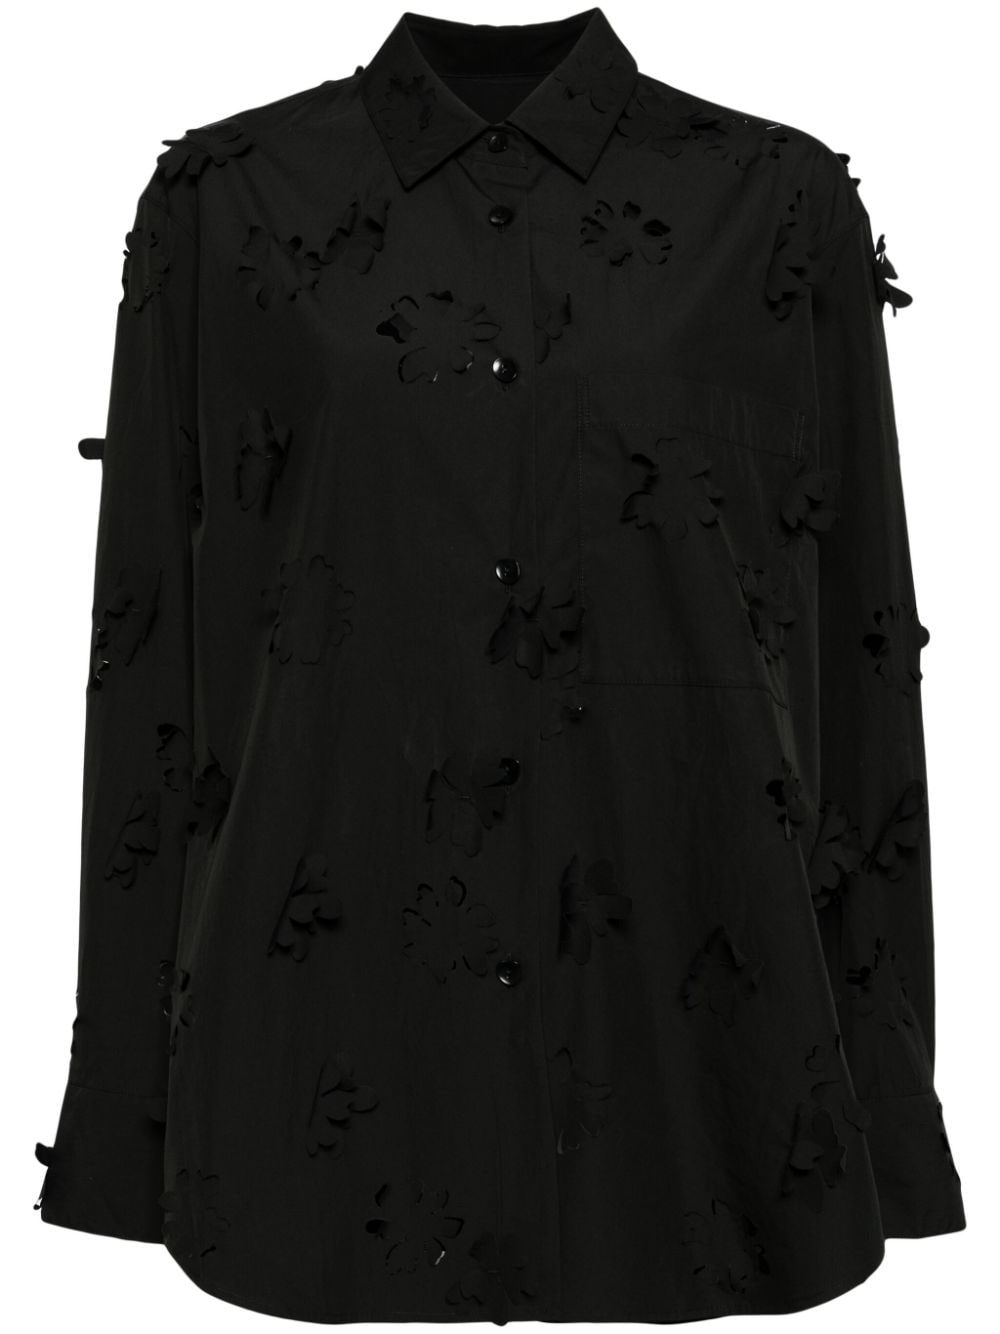 JNBY oversized cut-out shirt - Black von JNBY